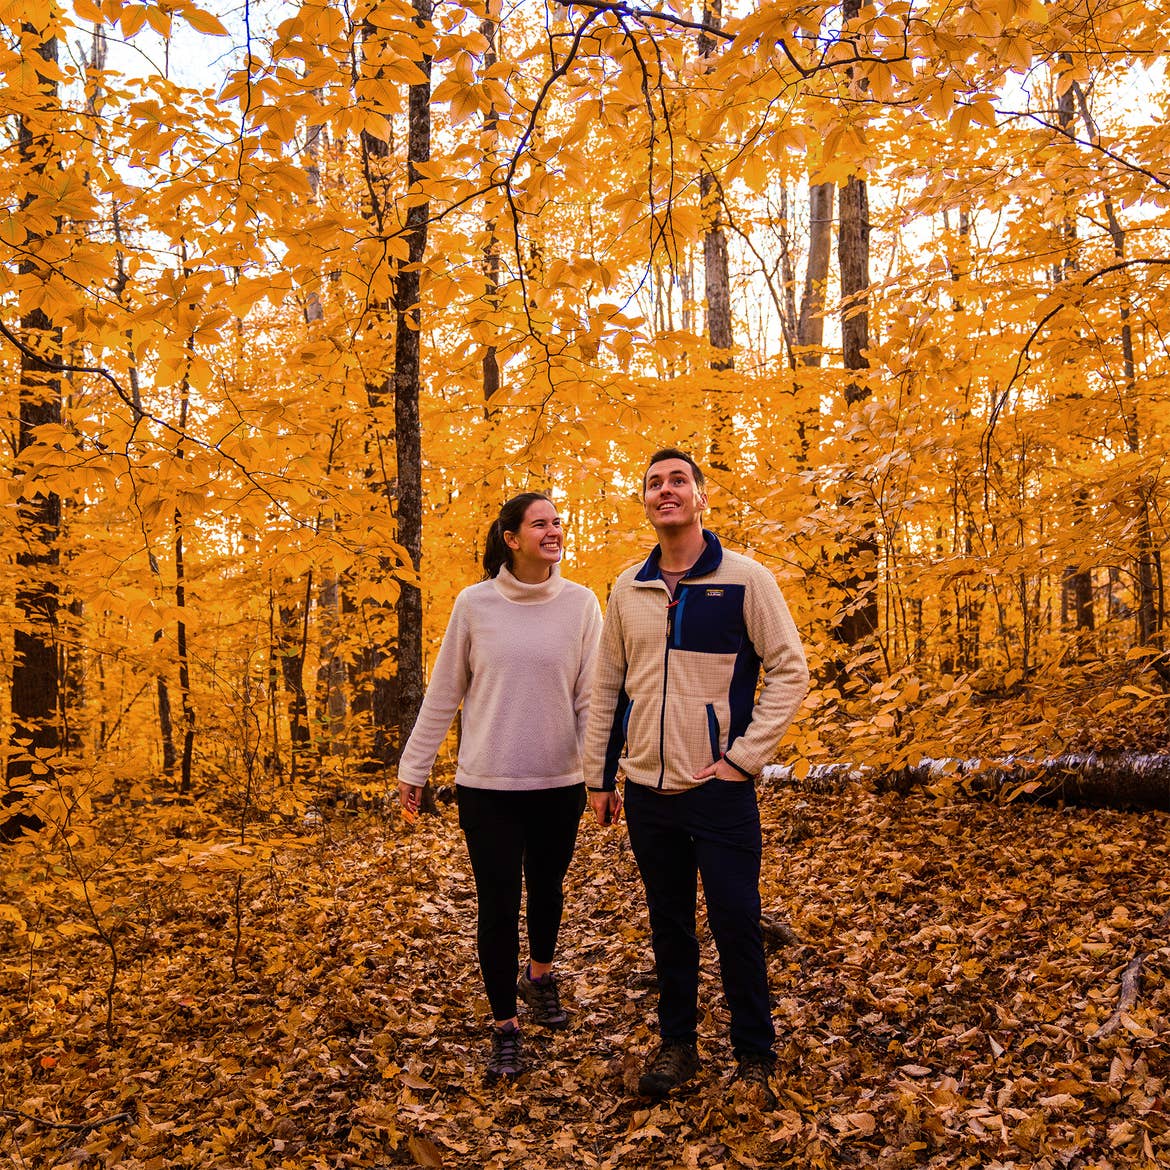 A woman (left) and man (right) wearing white sweaters and pullovers with black pants stand in the middle of trees with yellow fall foliage.